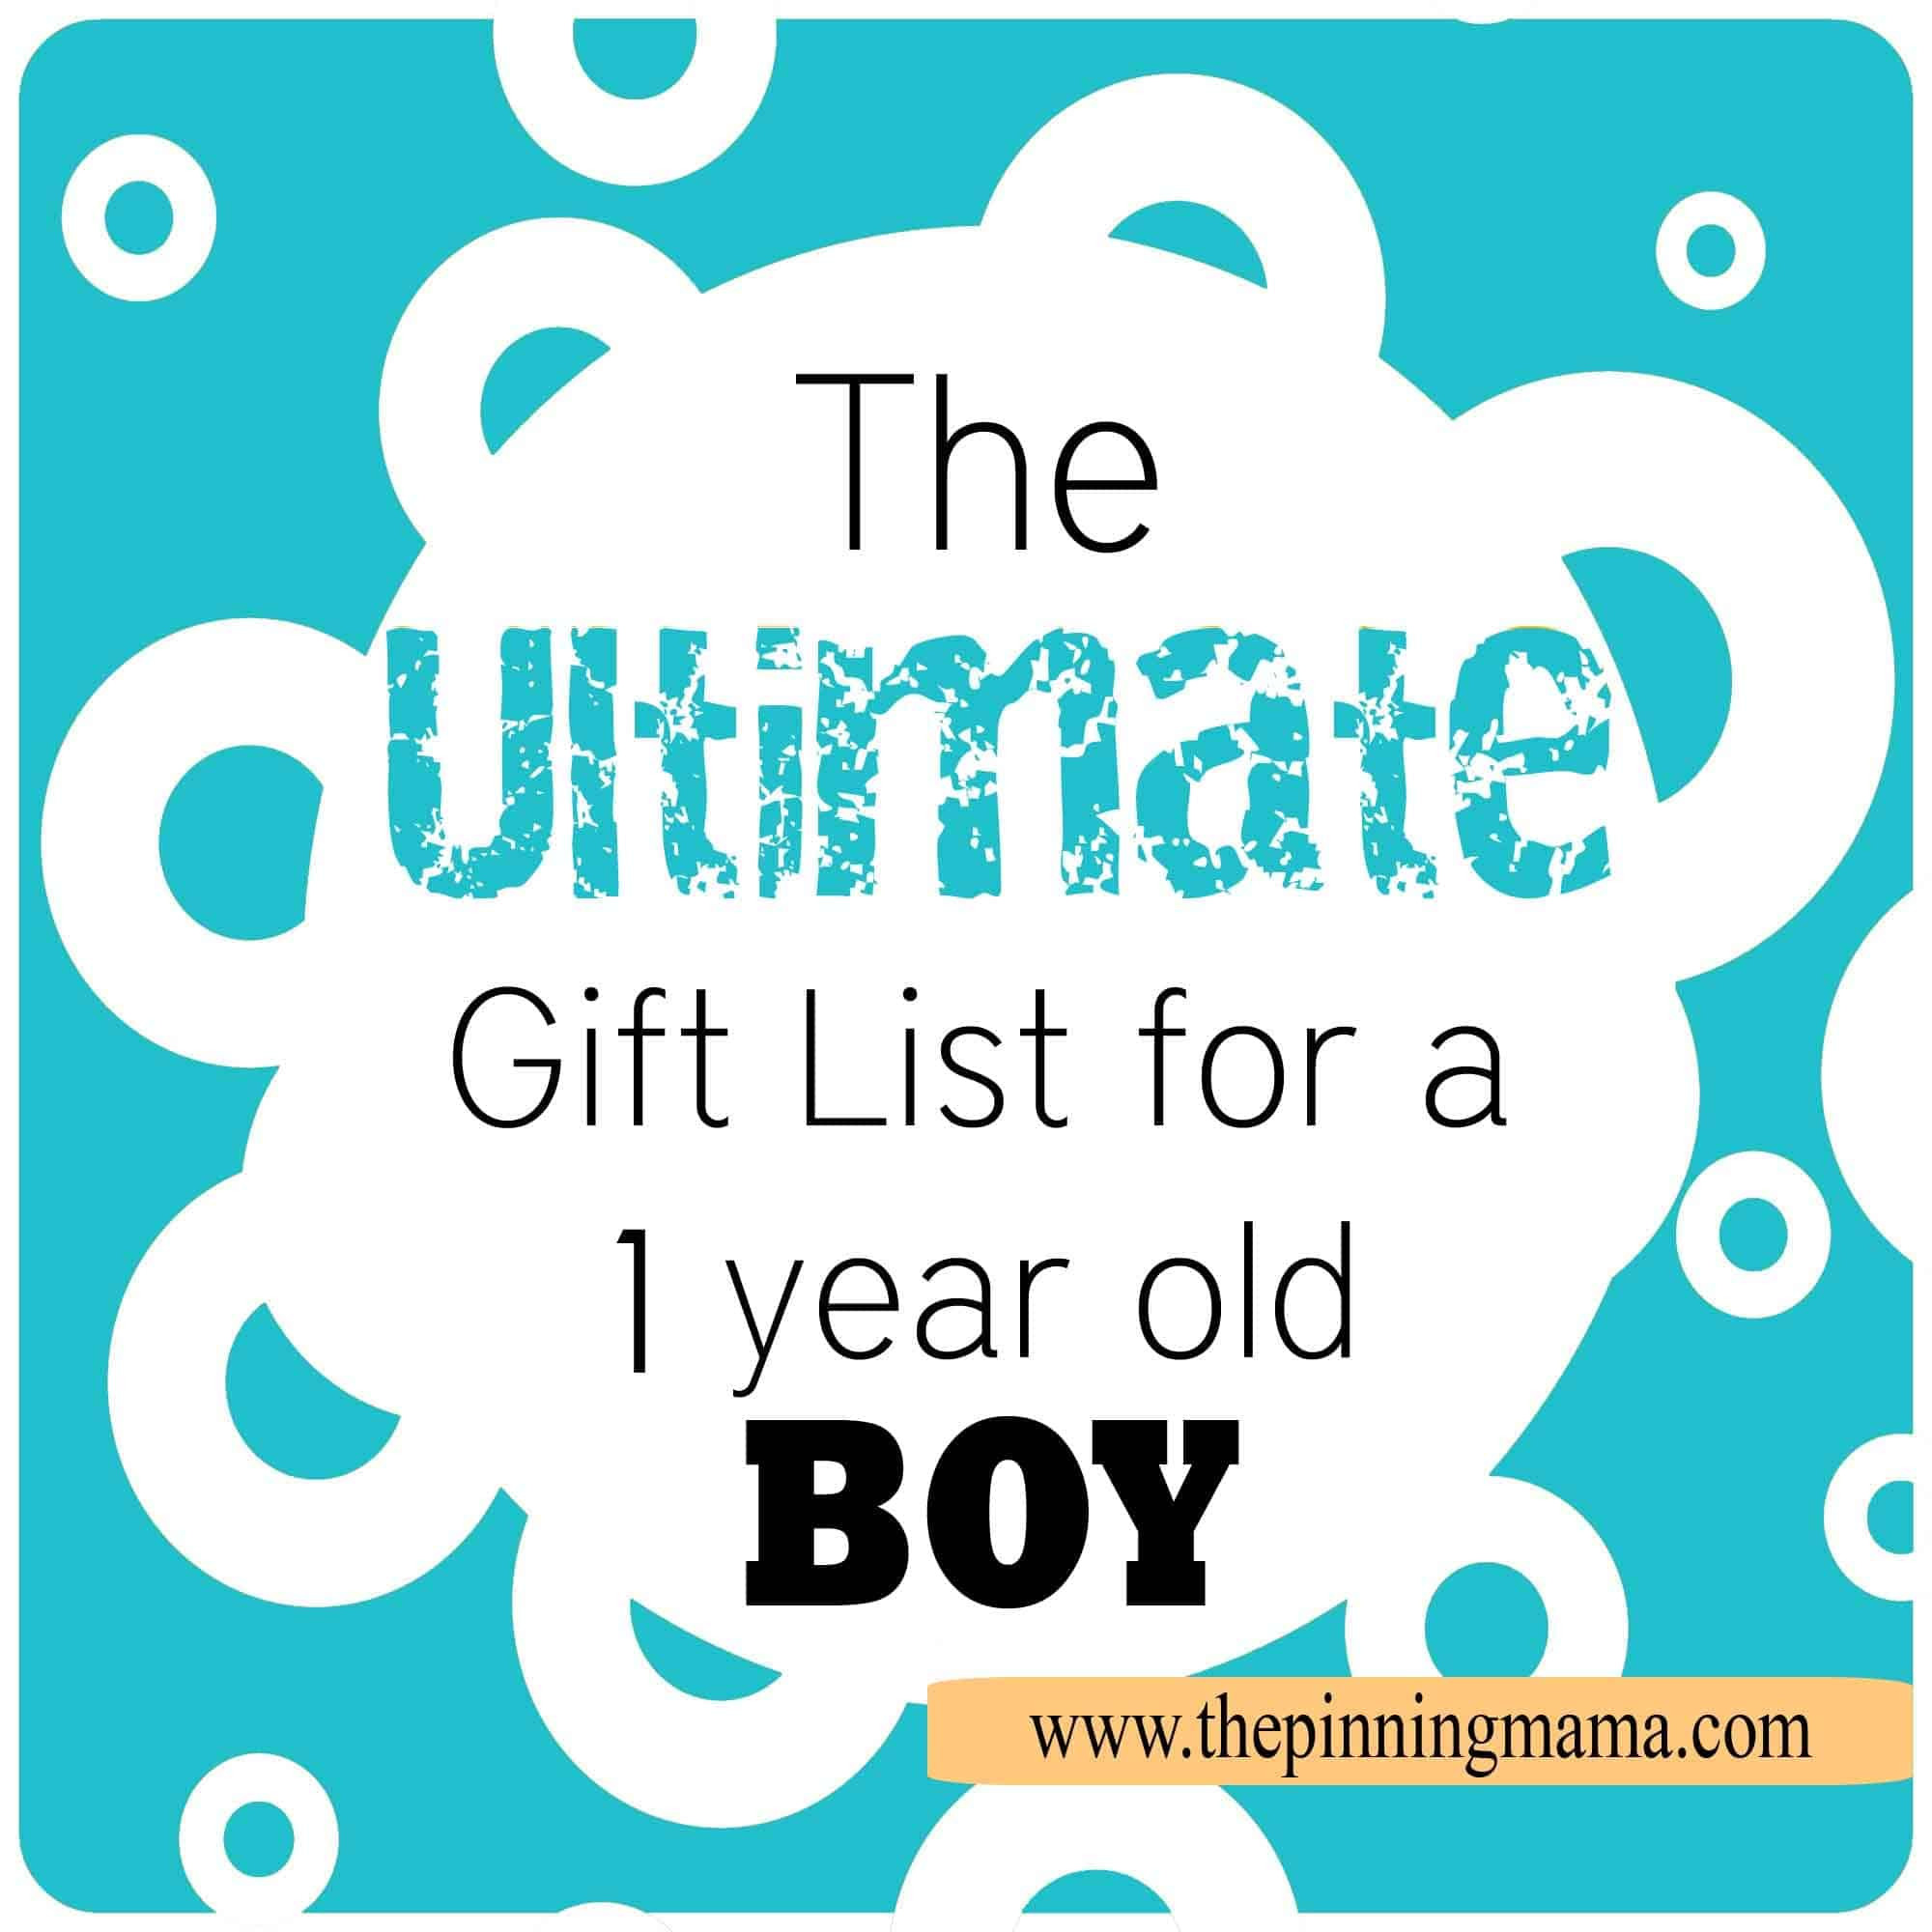 Gift Ideas For Baby Boy 1 Year Old
 The Ultimate Gift List for a 1 Year Old Boy • The Pinning